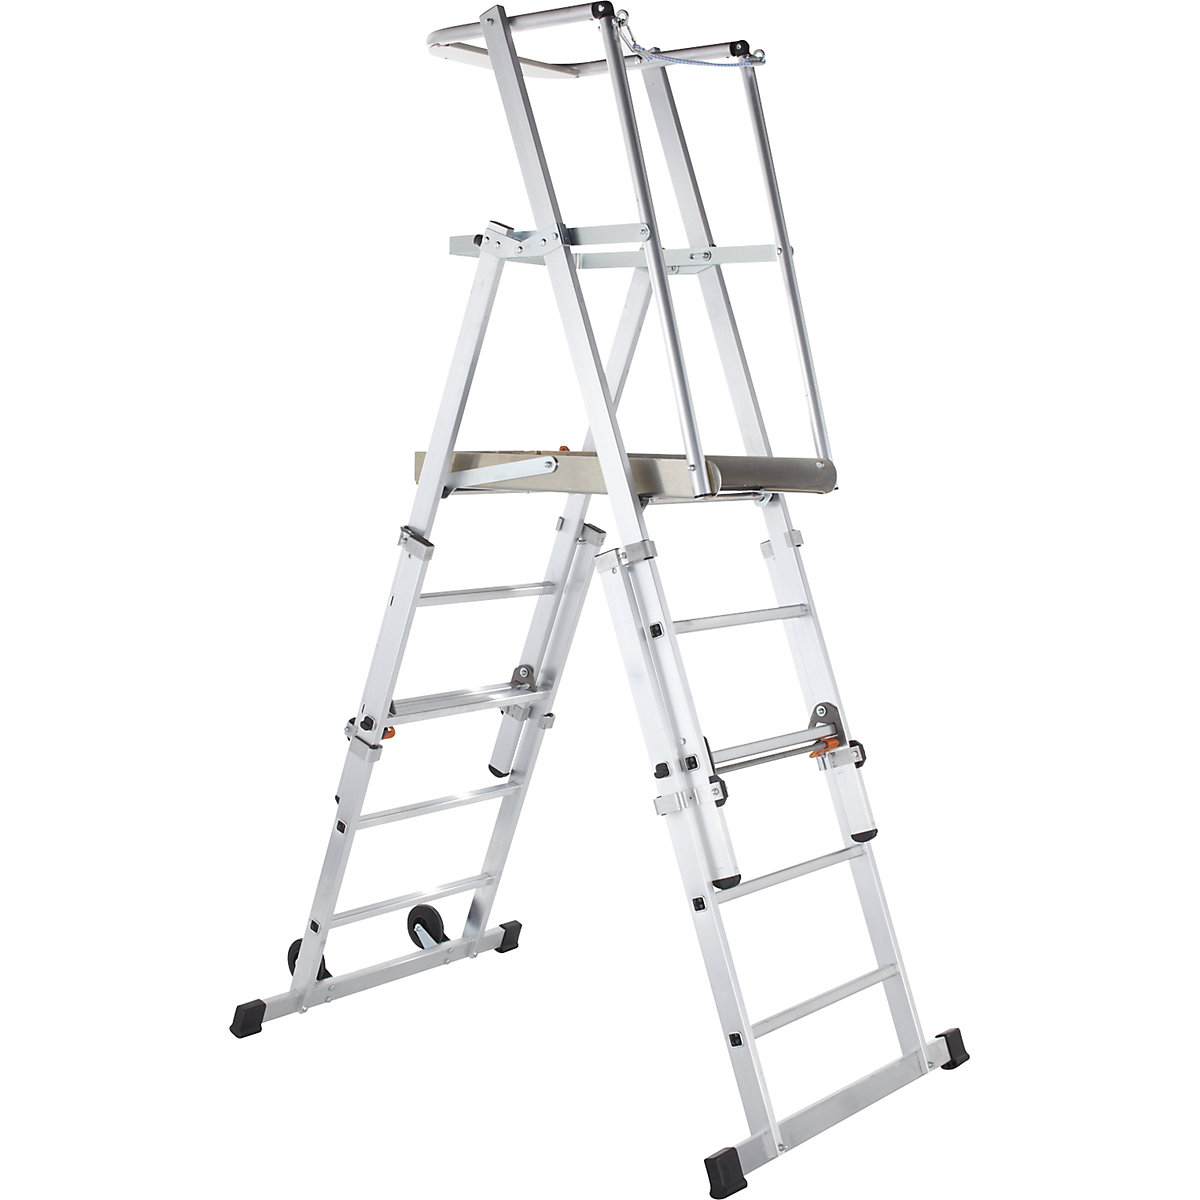 Telescopic mobile safety steps - ZARGES